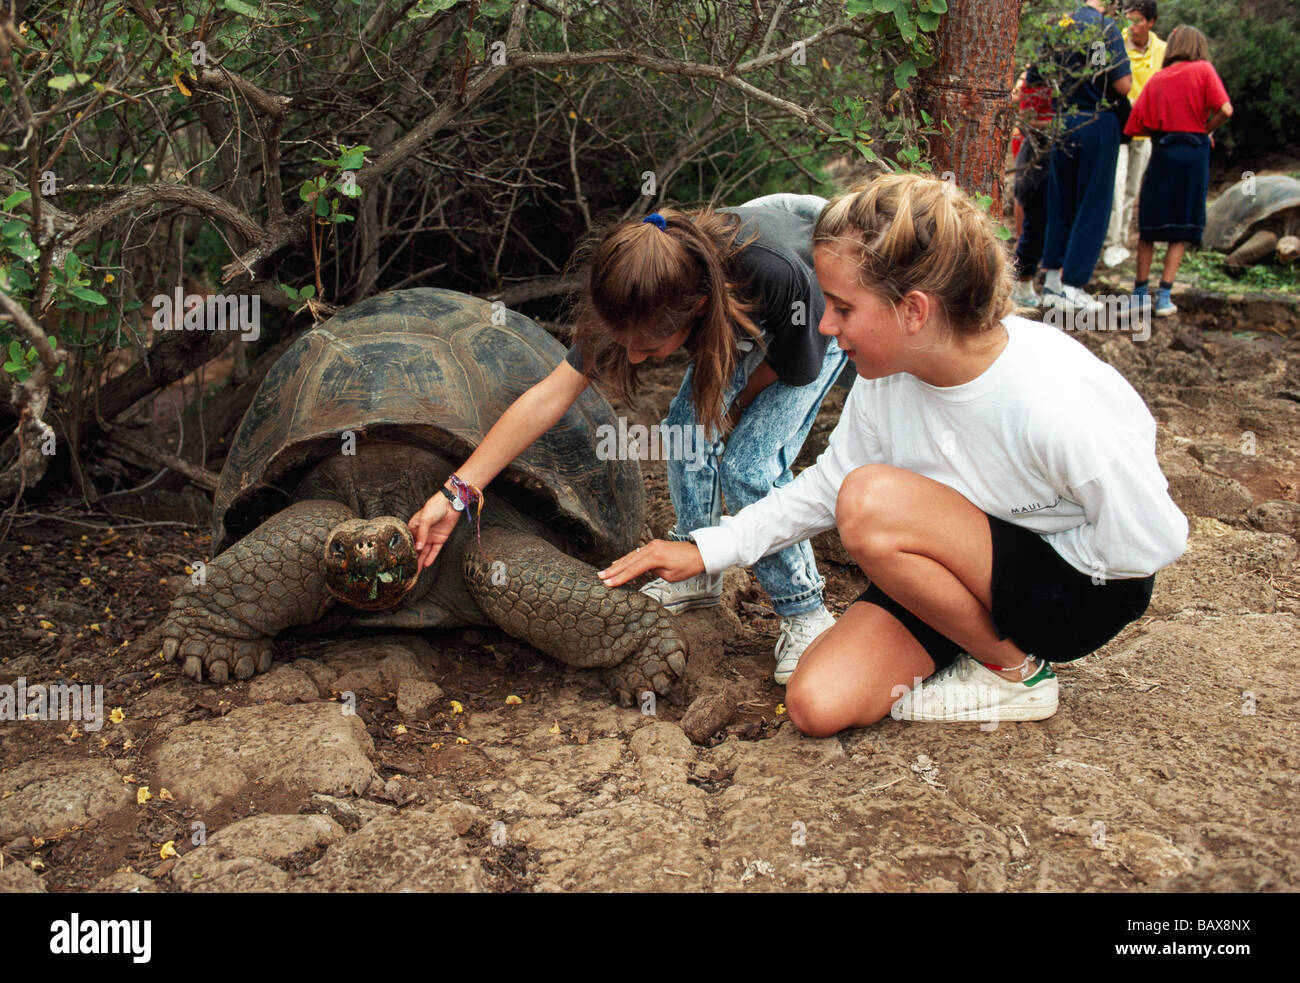 Two young girls communicating with Giant Tortoise. Stock Photo